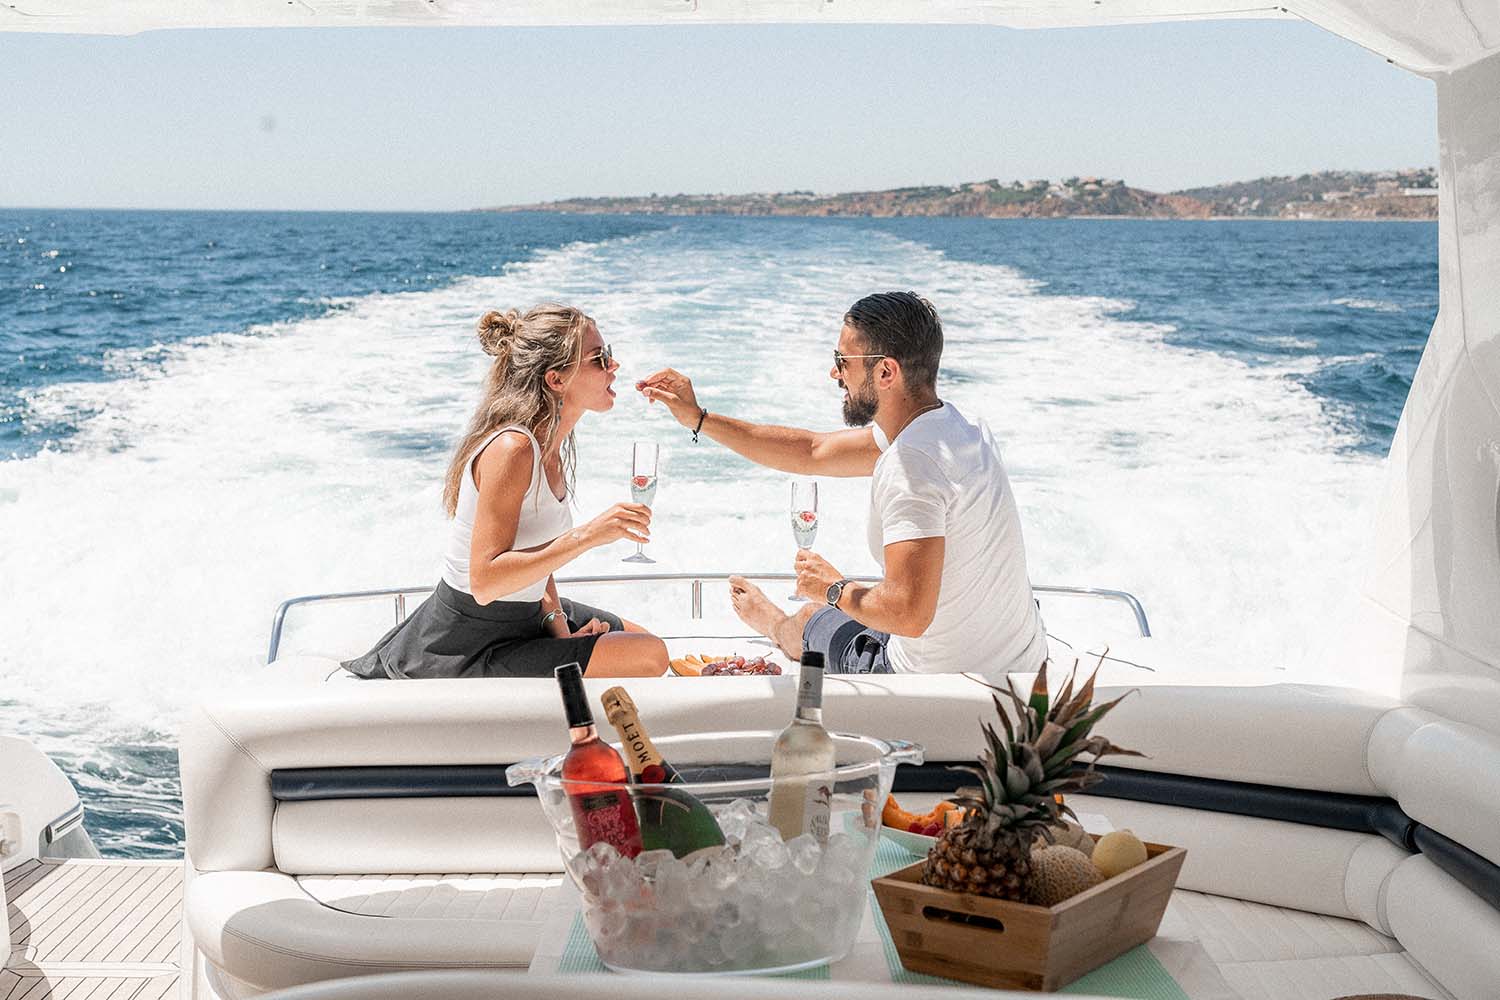 Planning a Yacht Charter: Five Top Tips for the Perfect Experience